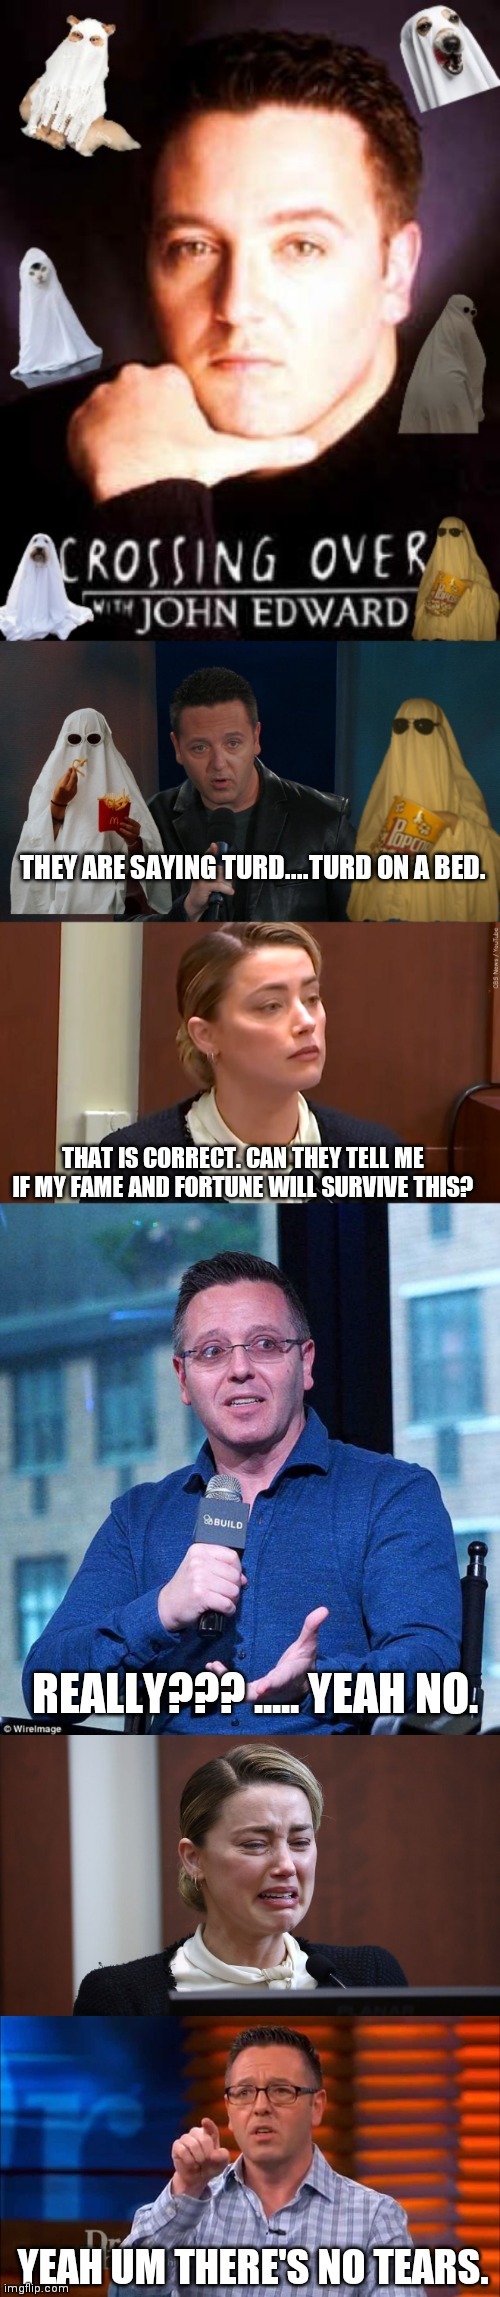 On The next episode of crossing over with john edward. | image tagged in amber heard,spooky,ghost | made w/ Imgflip meme maker